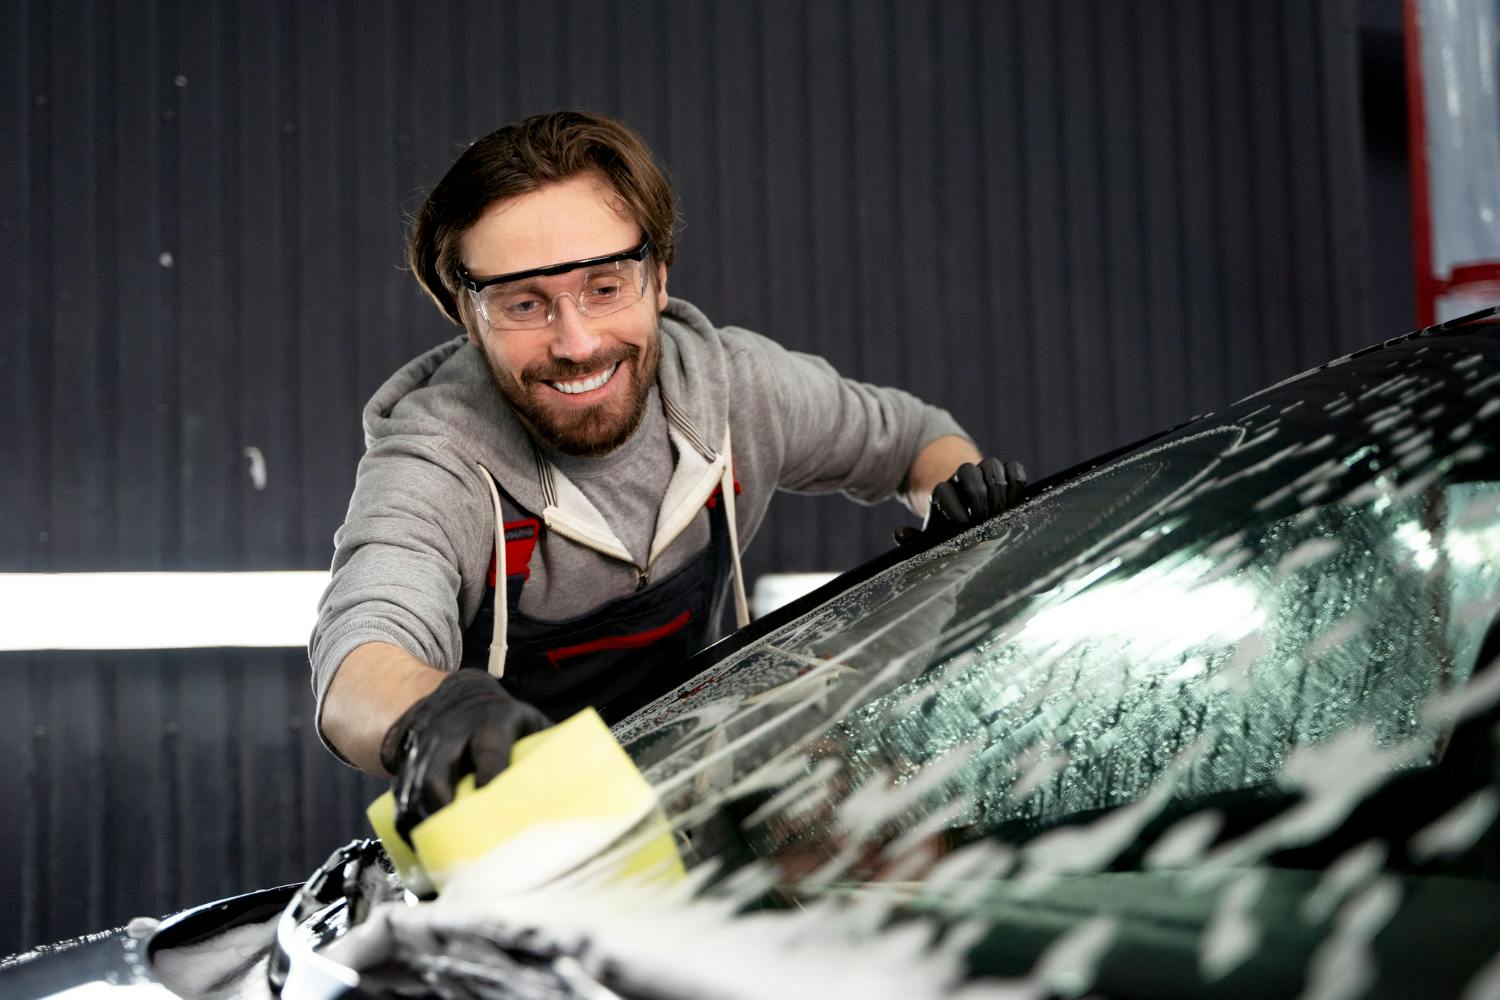 title article with man cleaning cars in the background